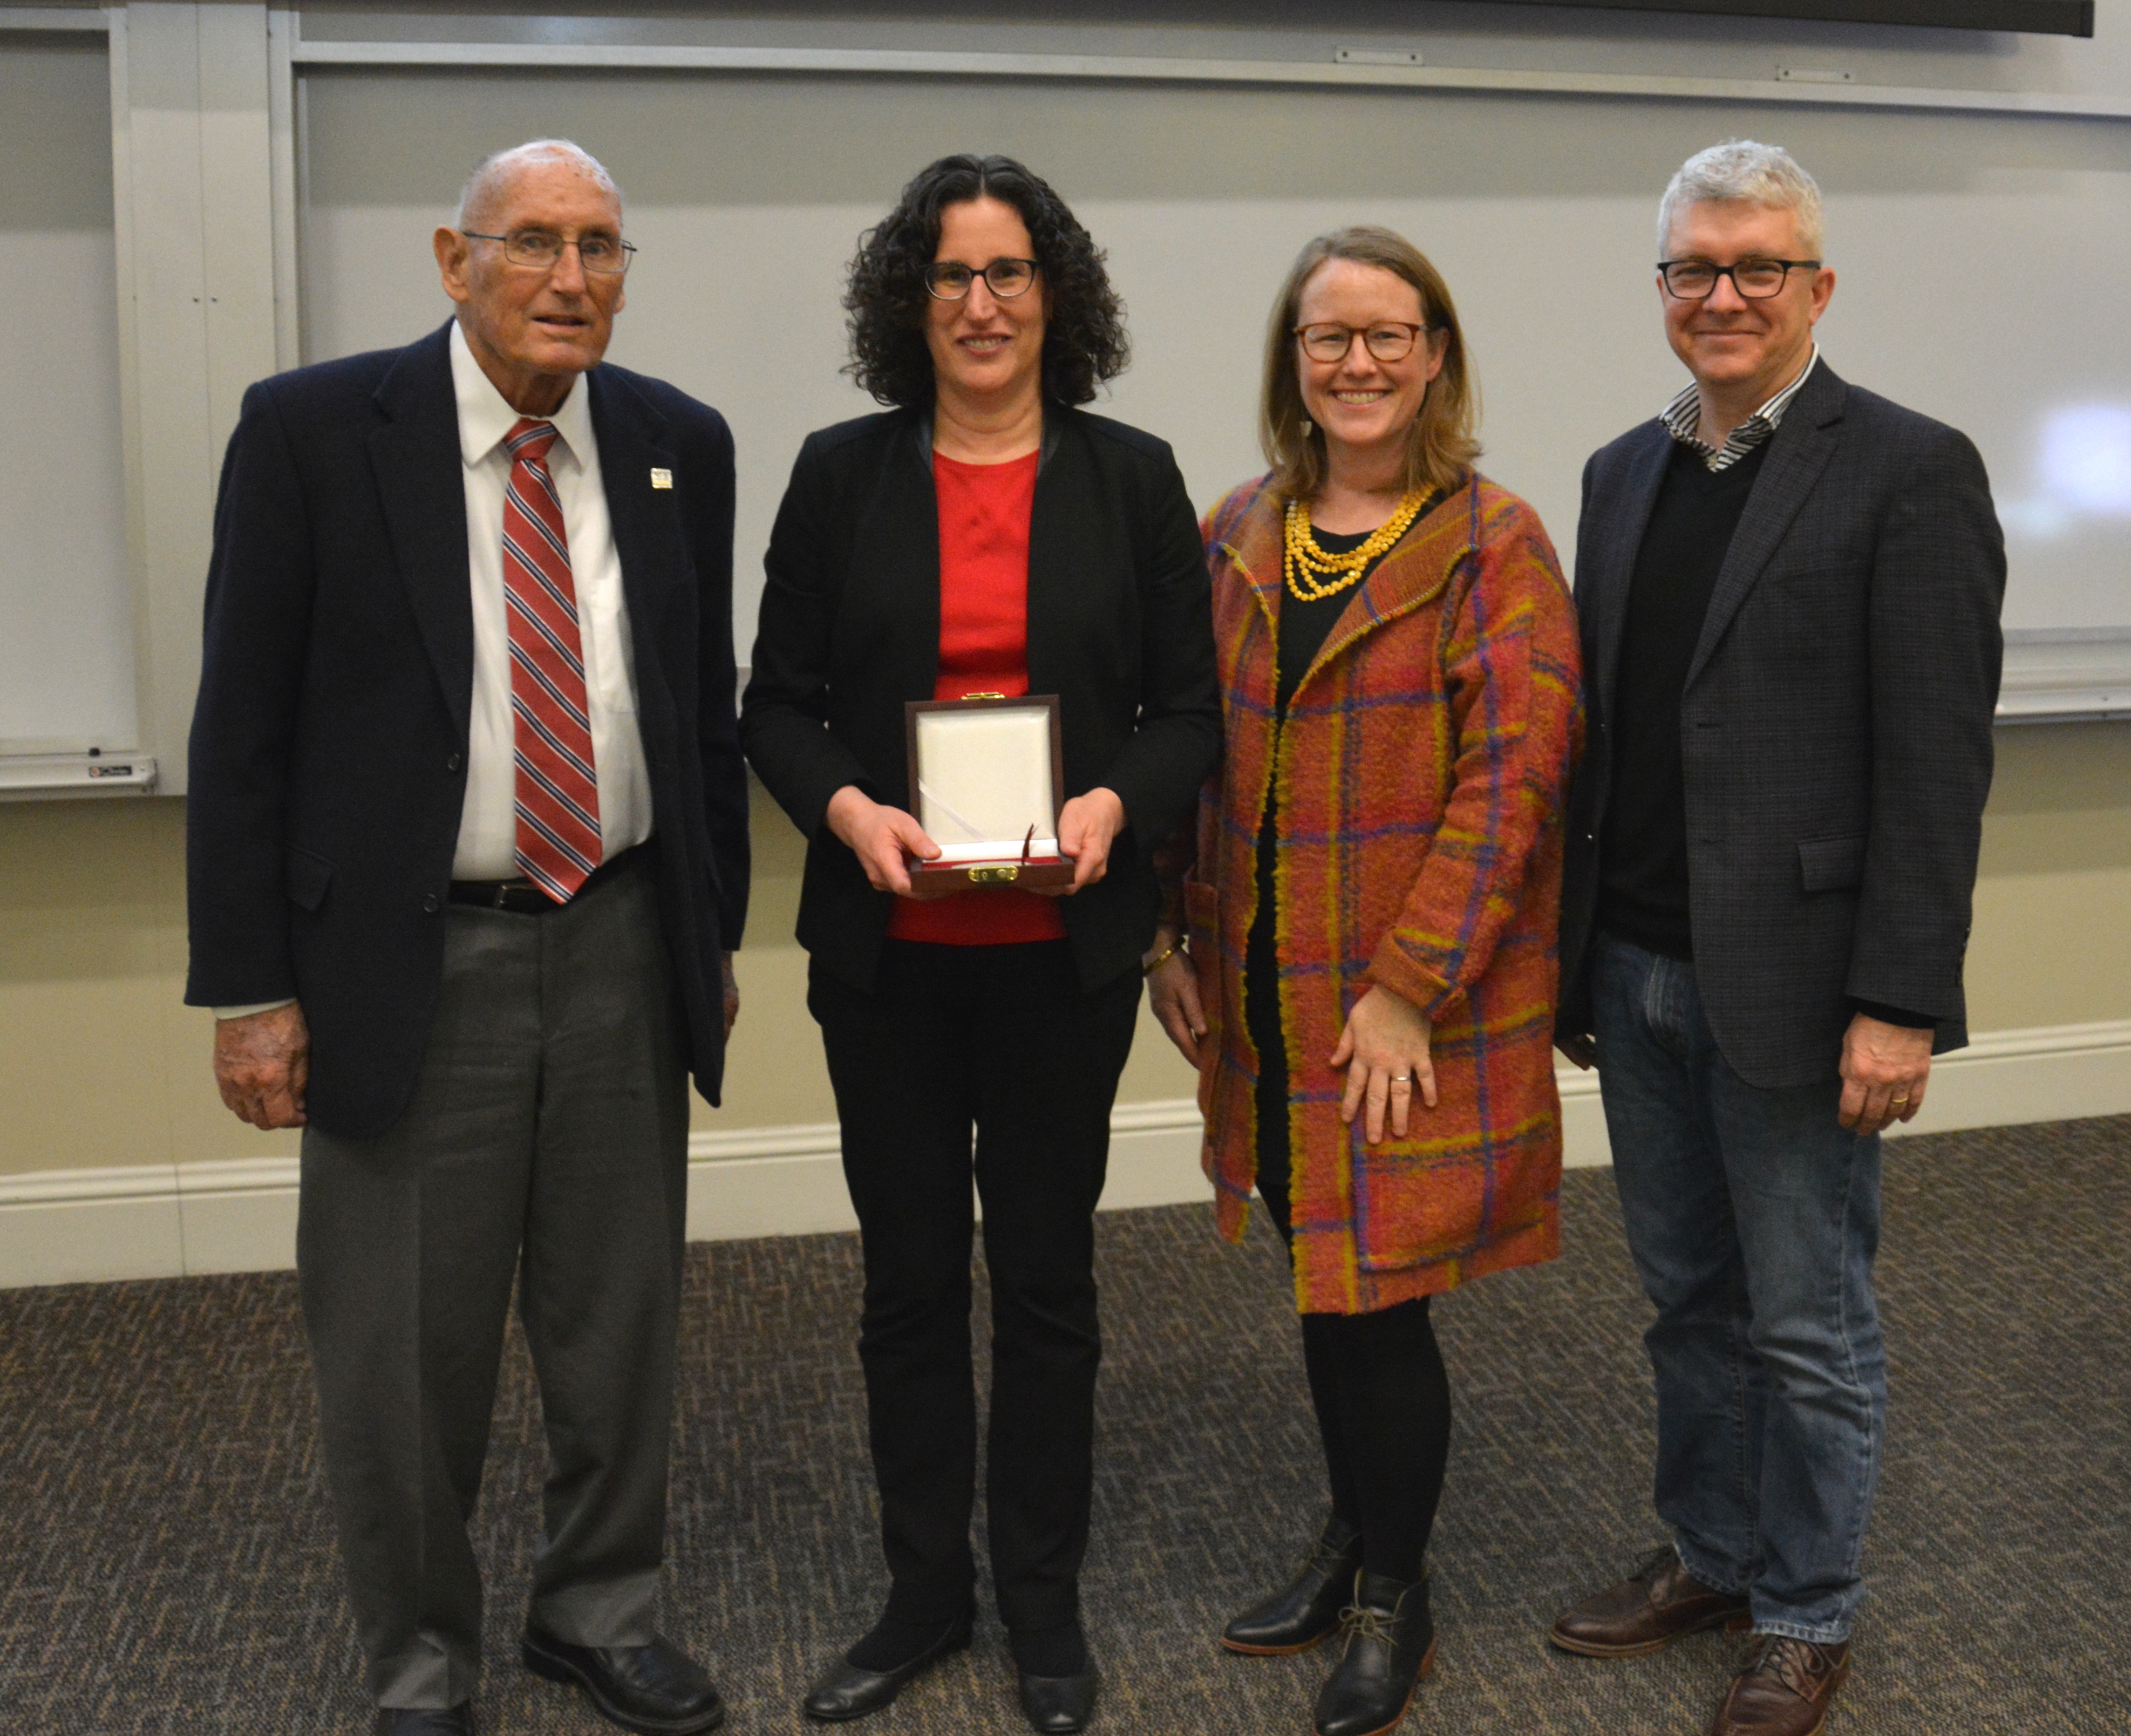  (Left to right): Mike Kosolapoff, Dr. Sharon Hammes-Schiffer, Lara Kosolapoff-Wright and Jerry Wright at the 34th Auburn – G.M. Kosolapoff Award Lecture.